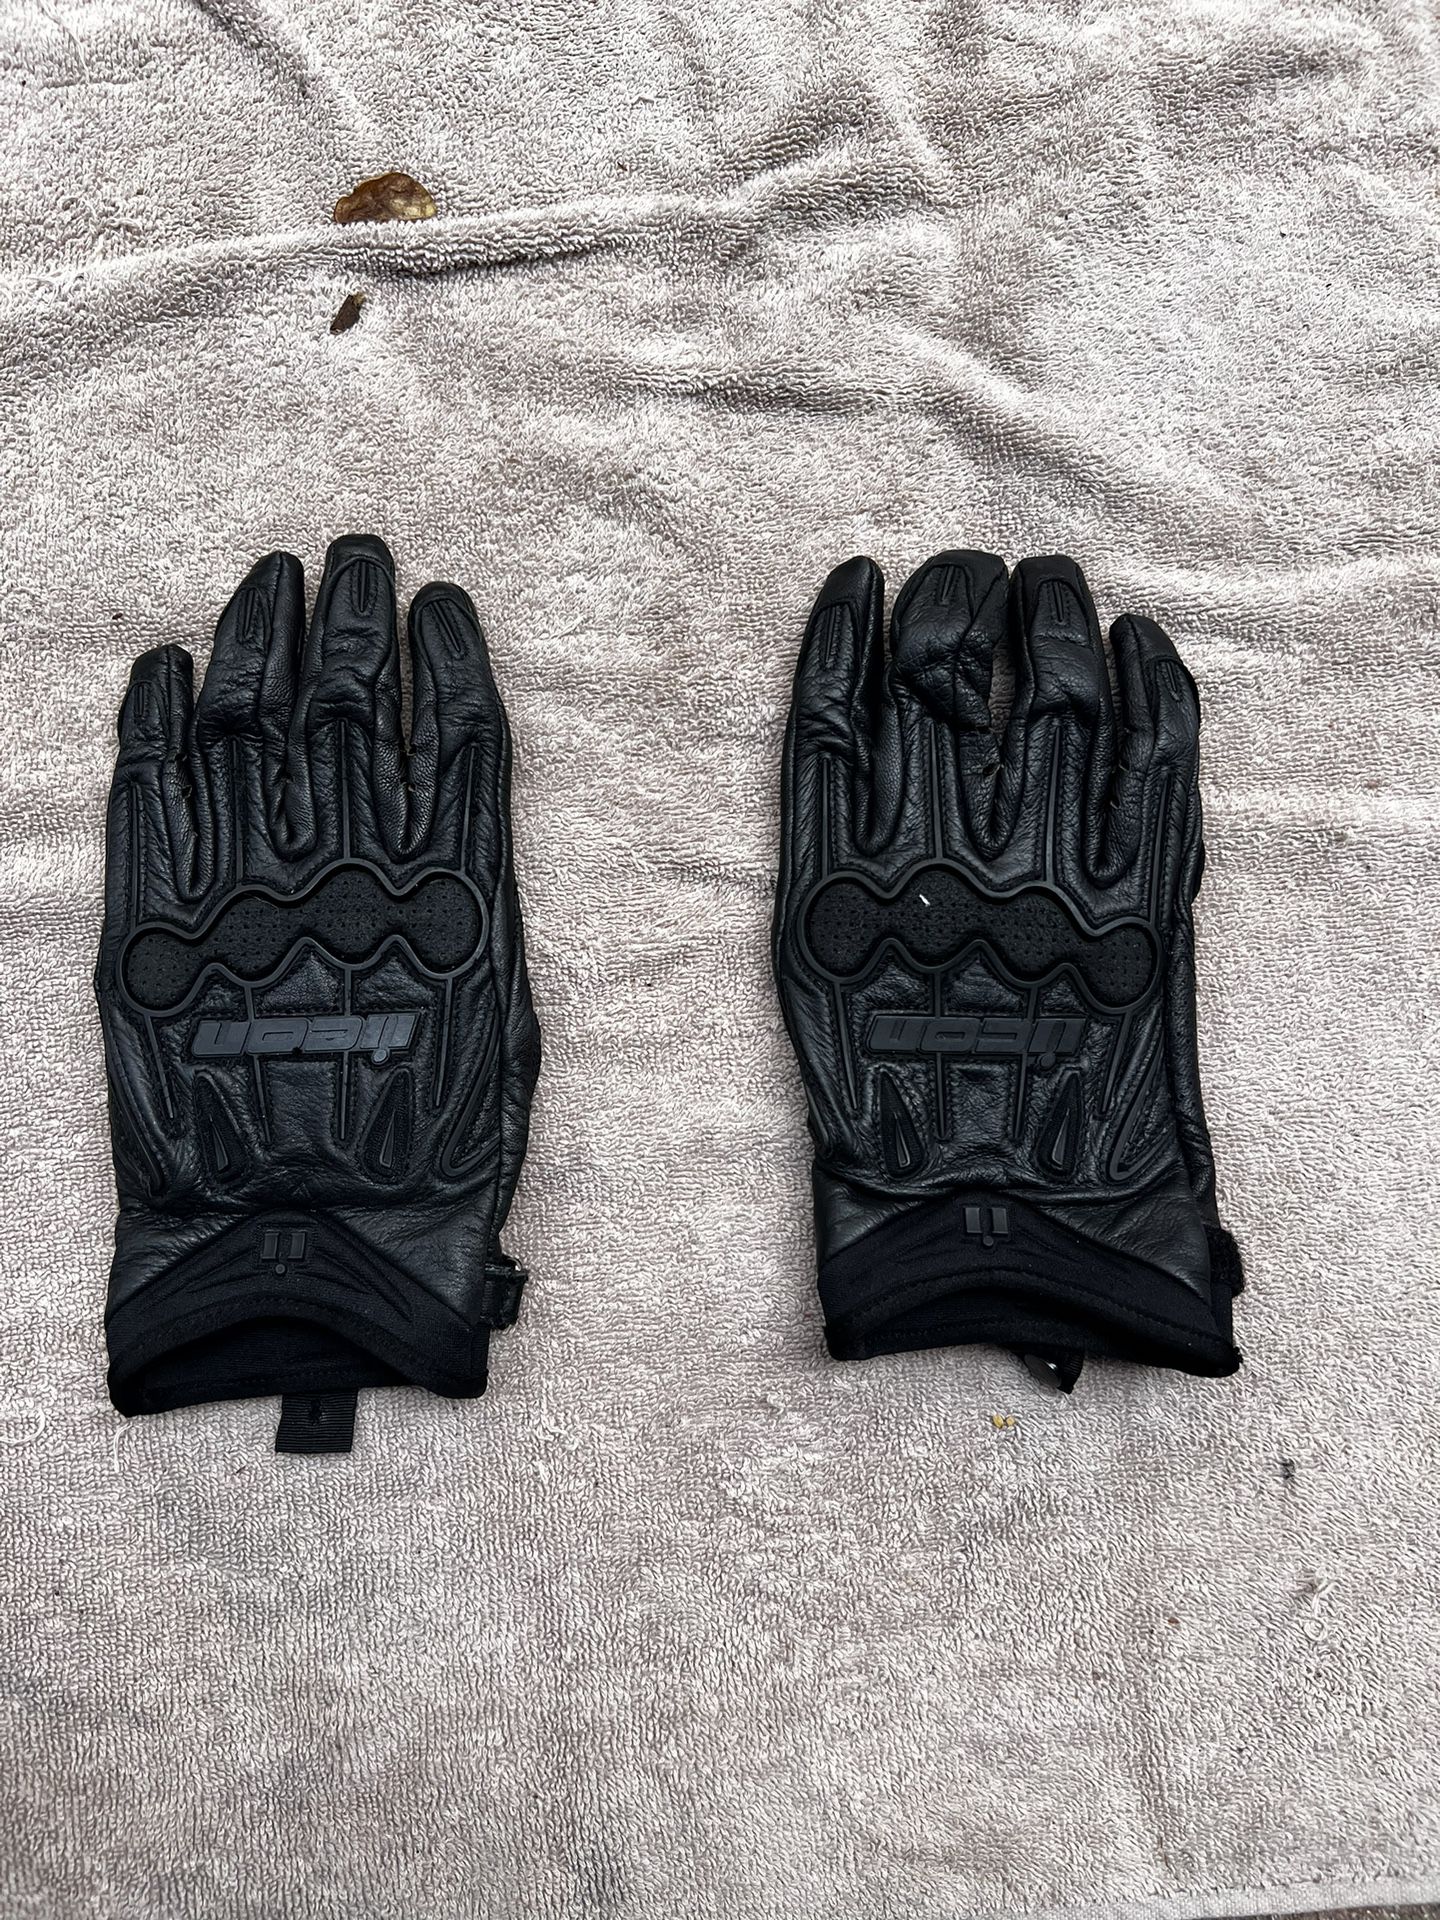 Icon Motorcycle gloves size Large 